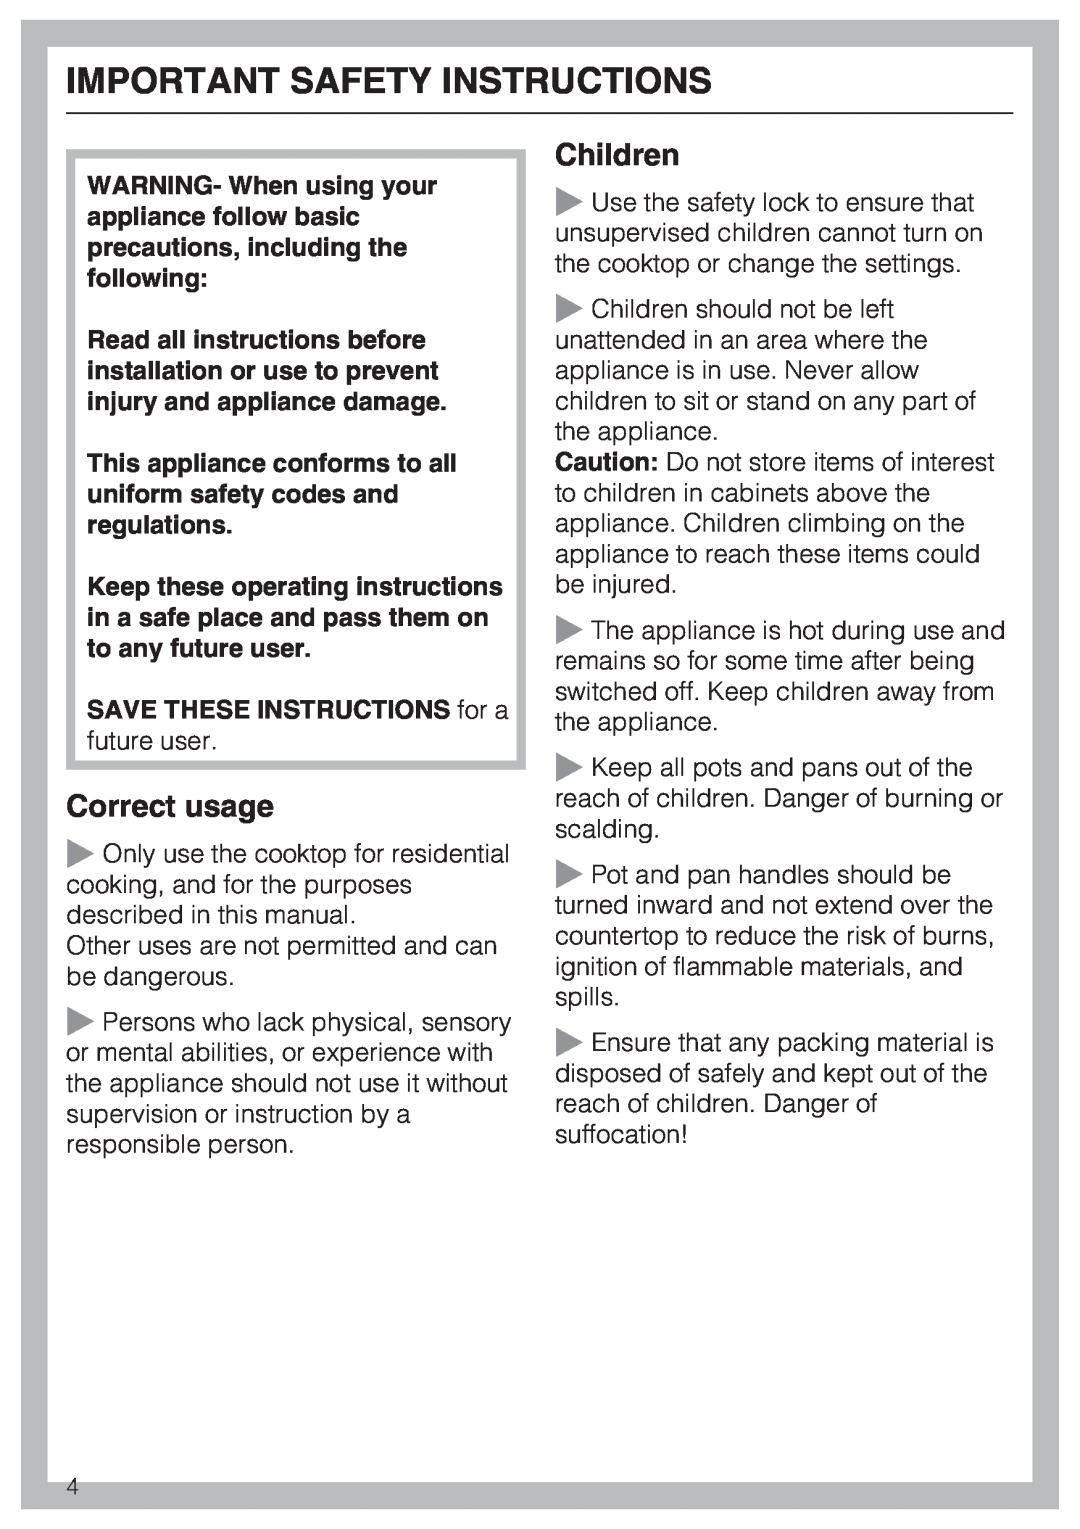 Miele KM 5880, KM 5860 Important Safety Instructions, Correct usage, Children, SAVE THESE INSTRUCTIONS for a future user 